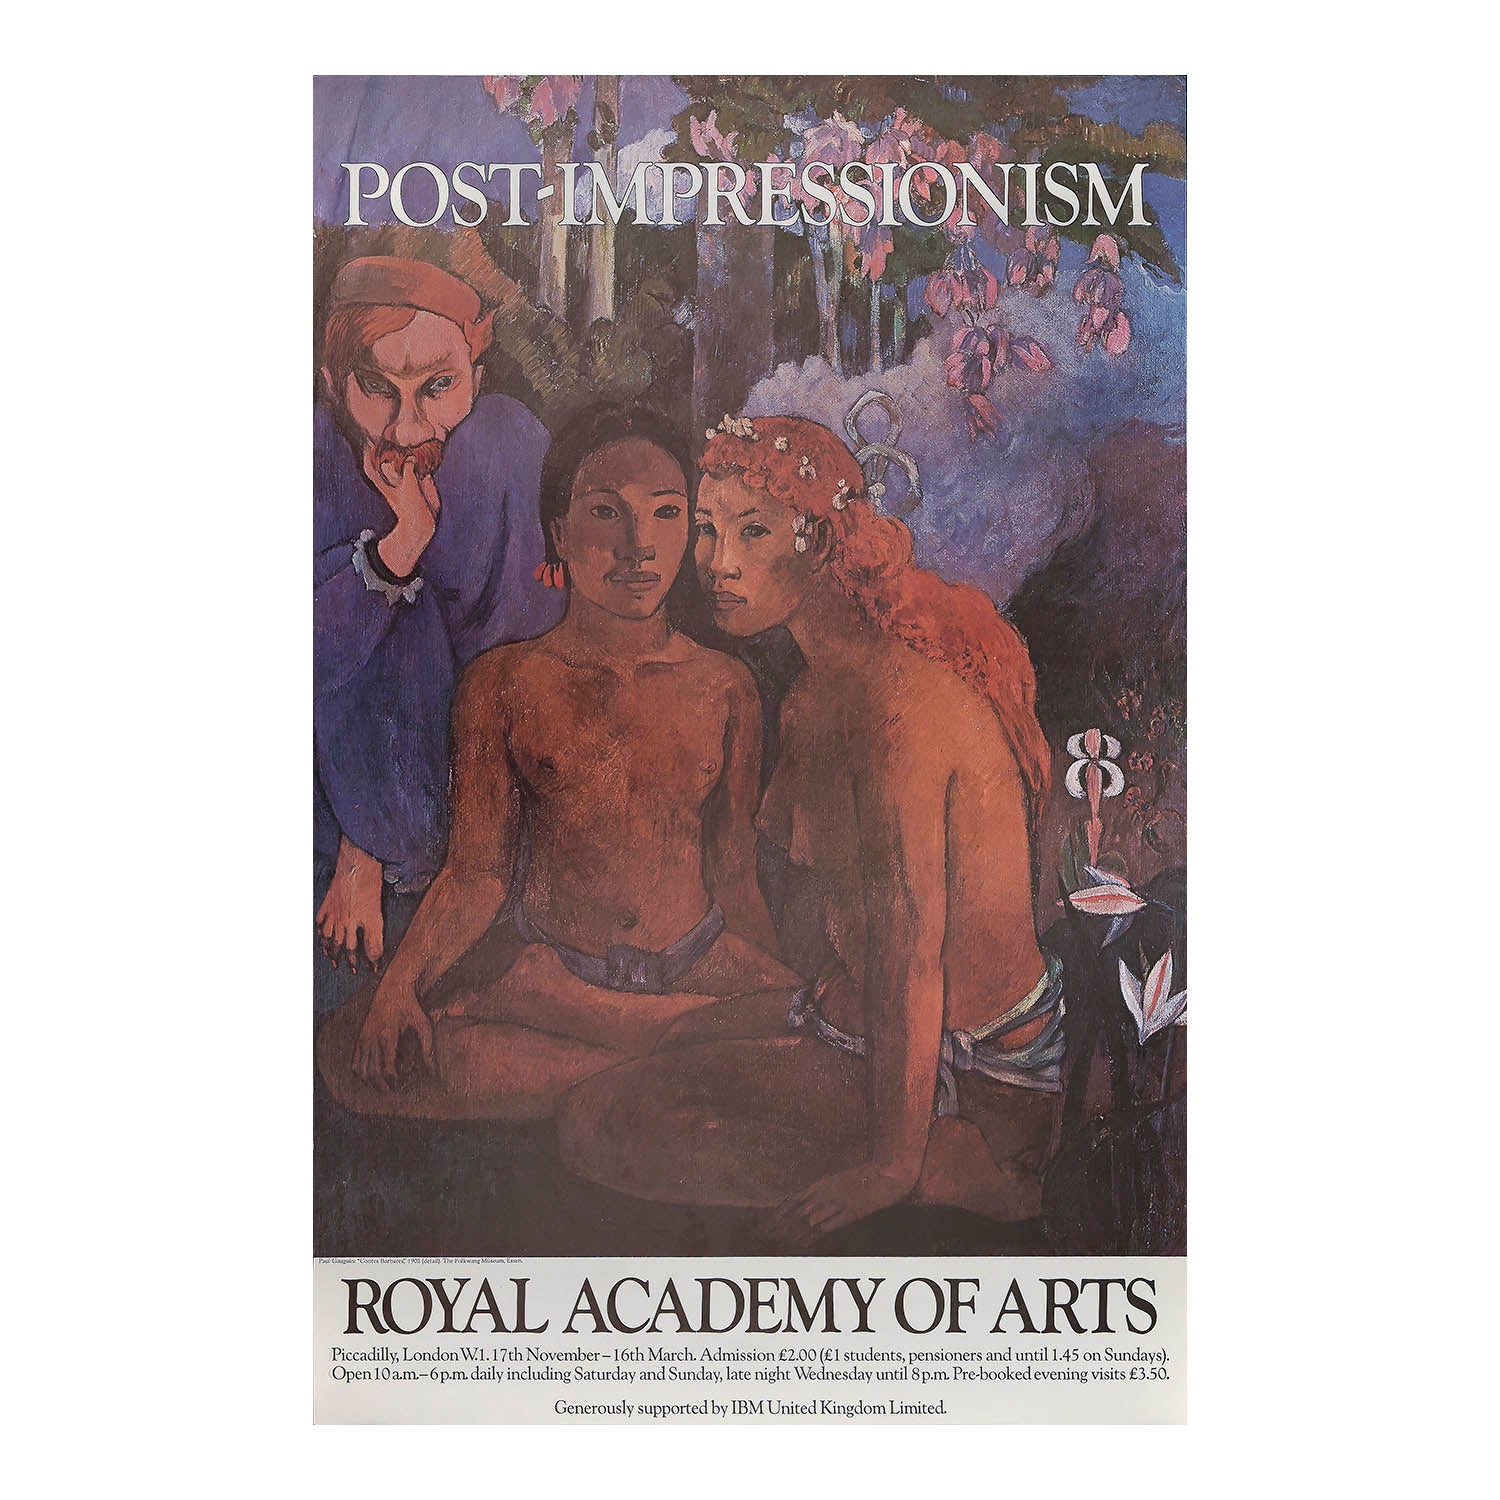 Original art exhibition poster, Post Impressionism, Royal Academy of Arts, c. 1980. The design includes a detail from Contes Barbares (1902) by Paul Gauguin.